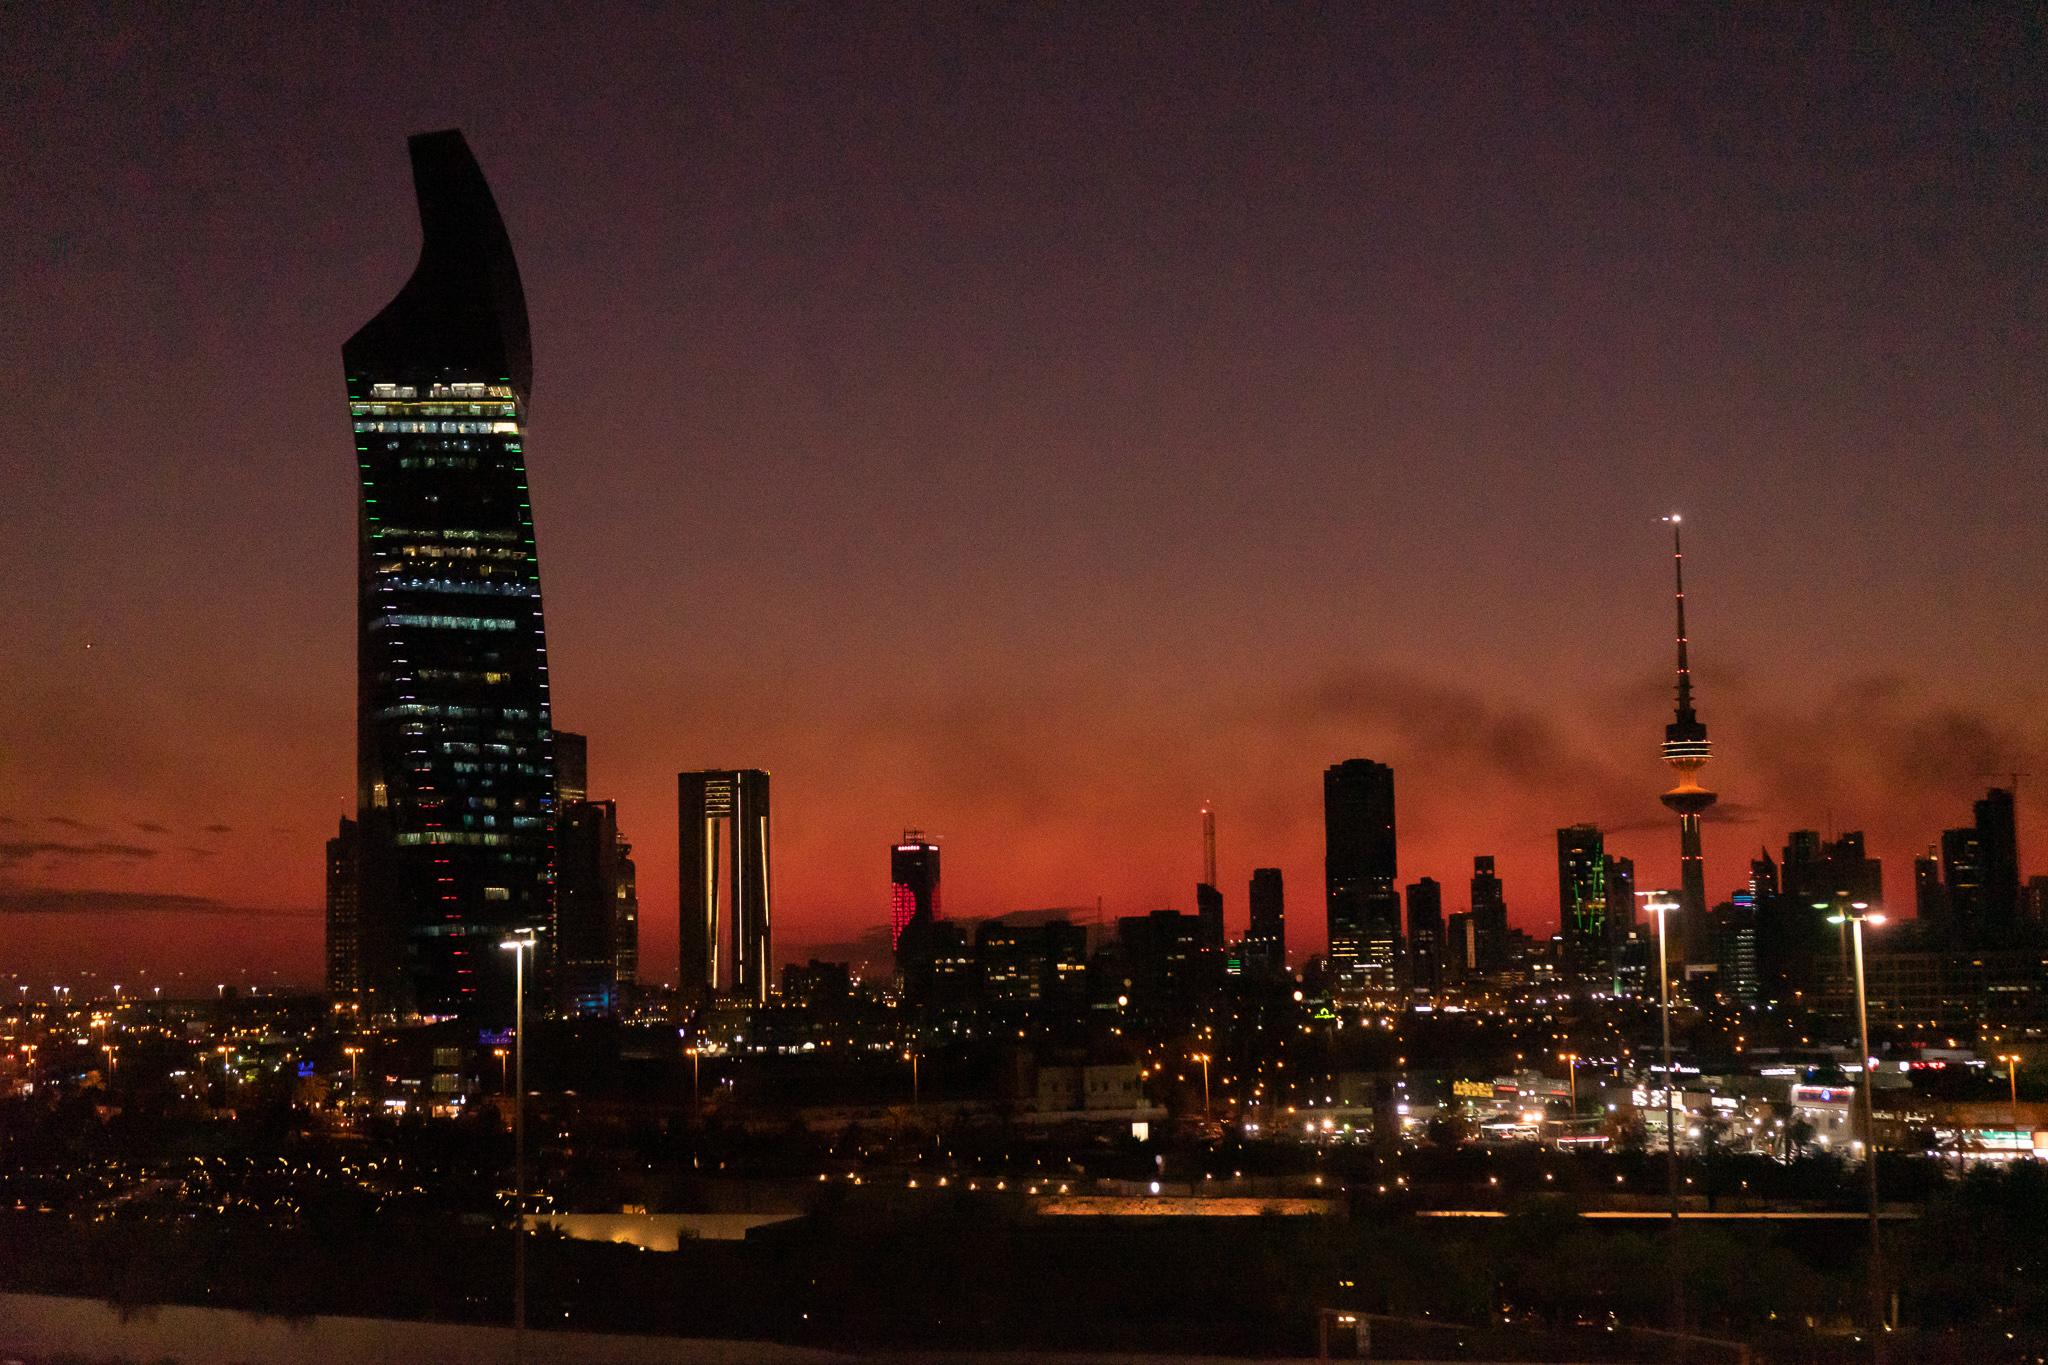 view of Kuwait lit up at night